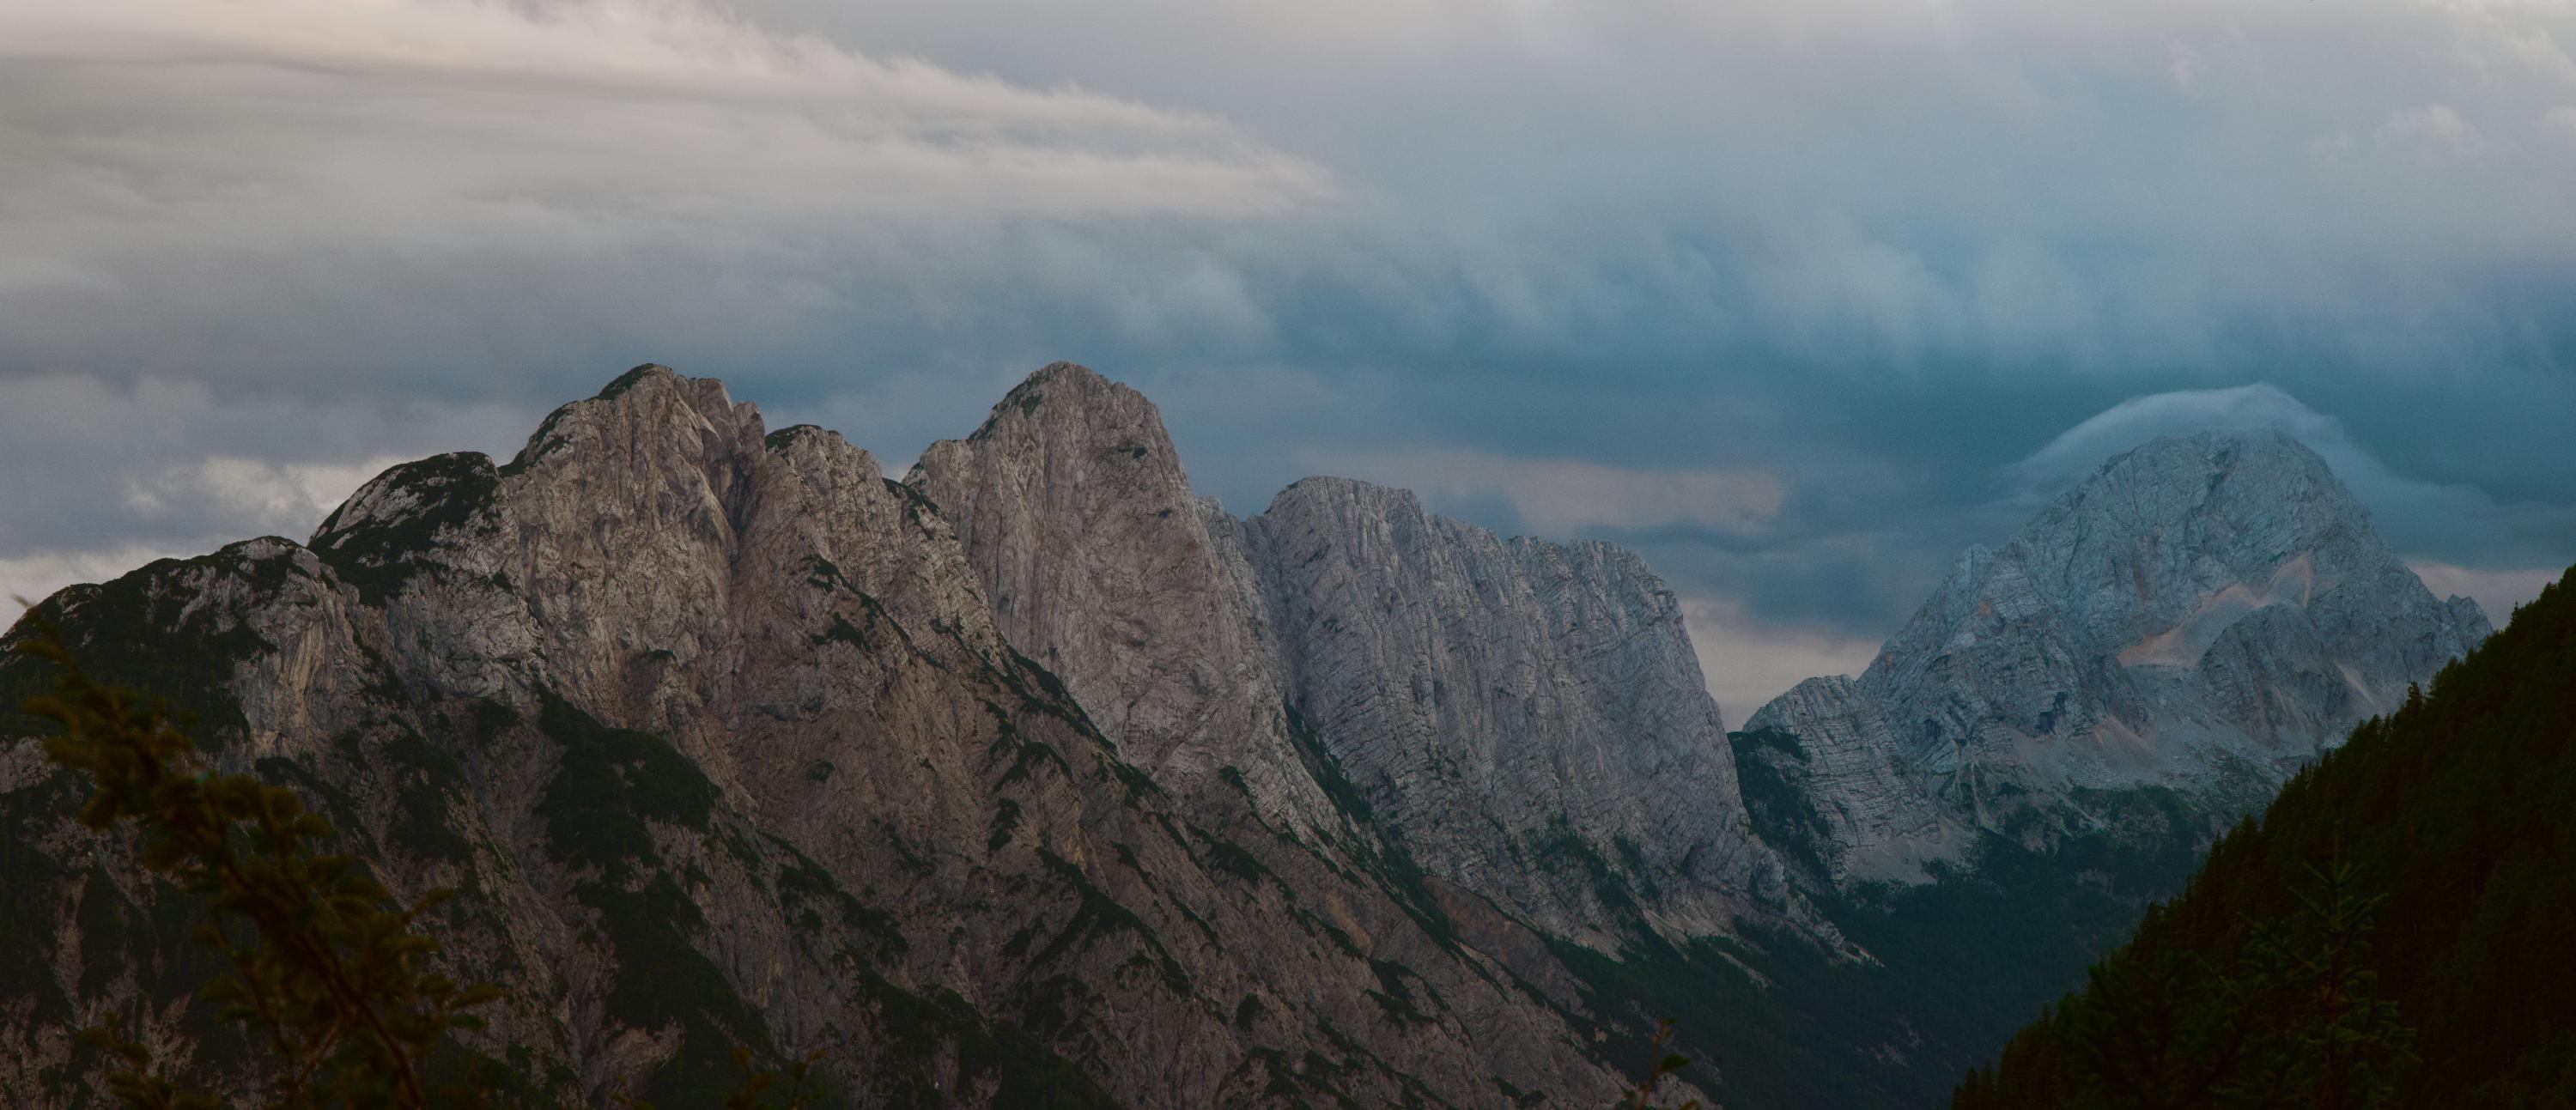 A ridgeline backed by cloud, with one cloud sitting like a cap on the right most peak, near Mount Triglav, Slovenia